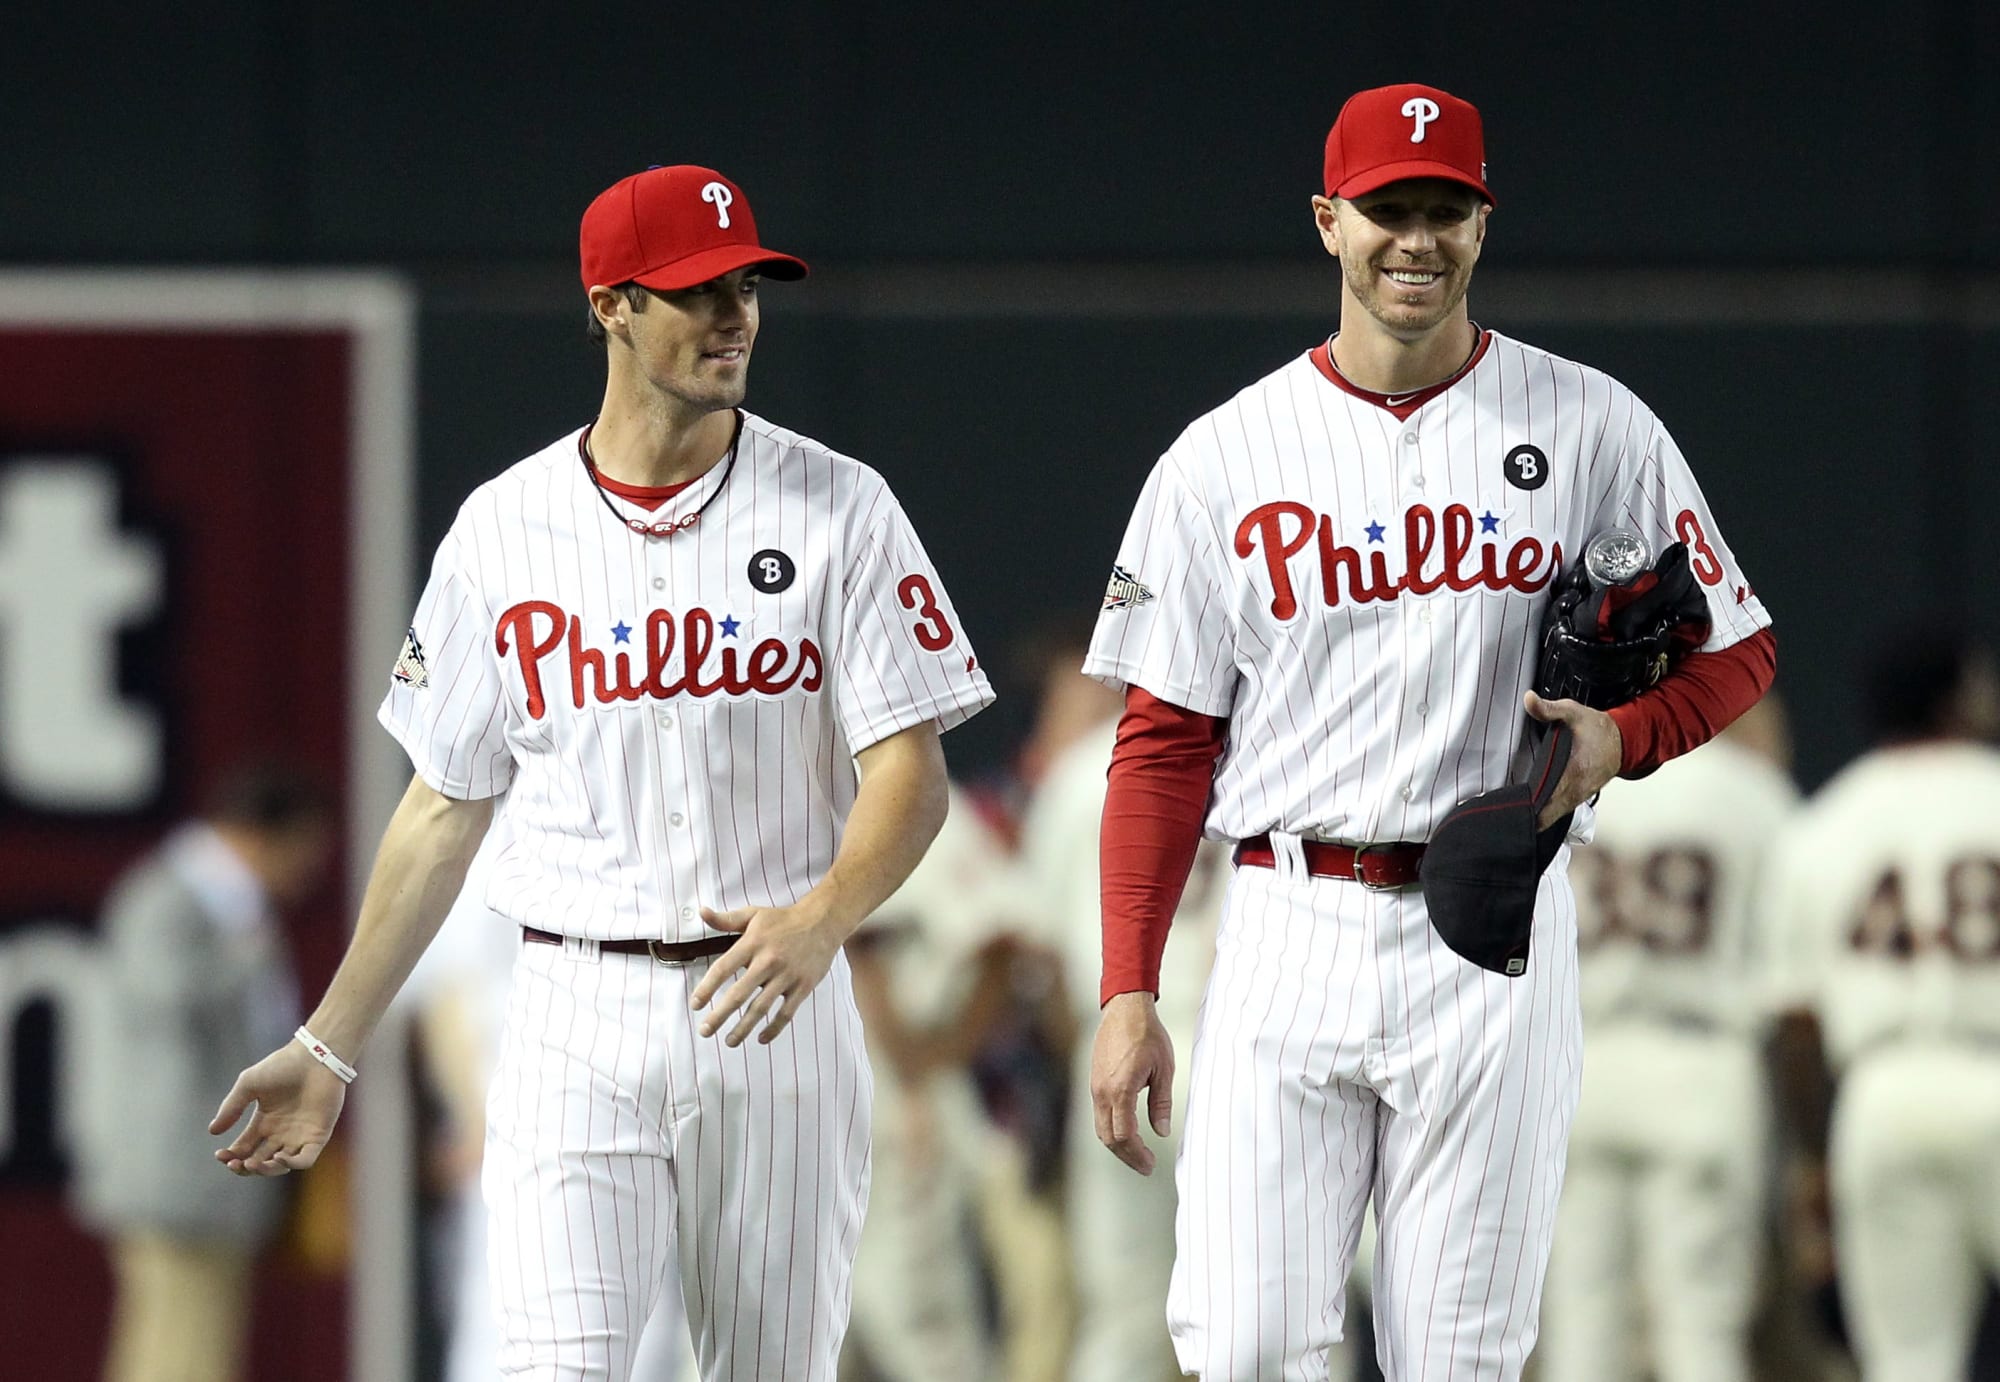 Top 10 Phillies Starting Pitchers of the Last 10 Years